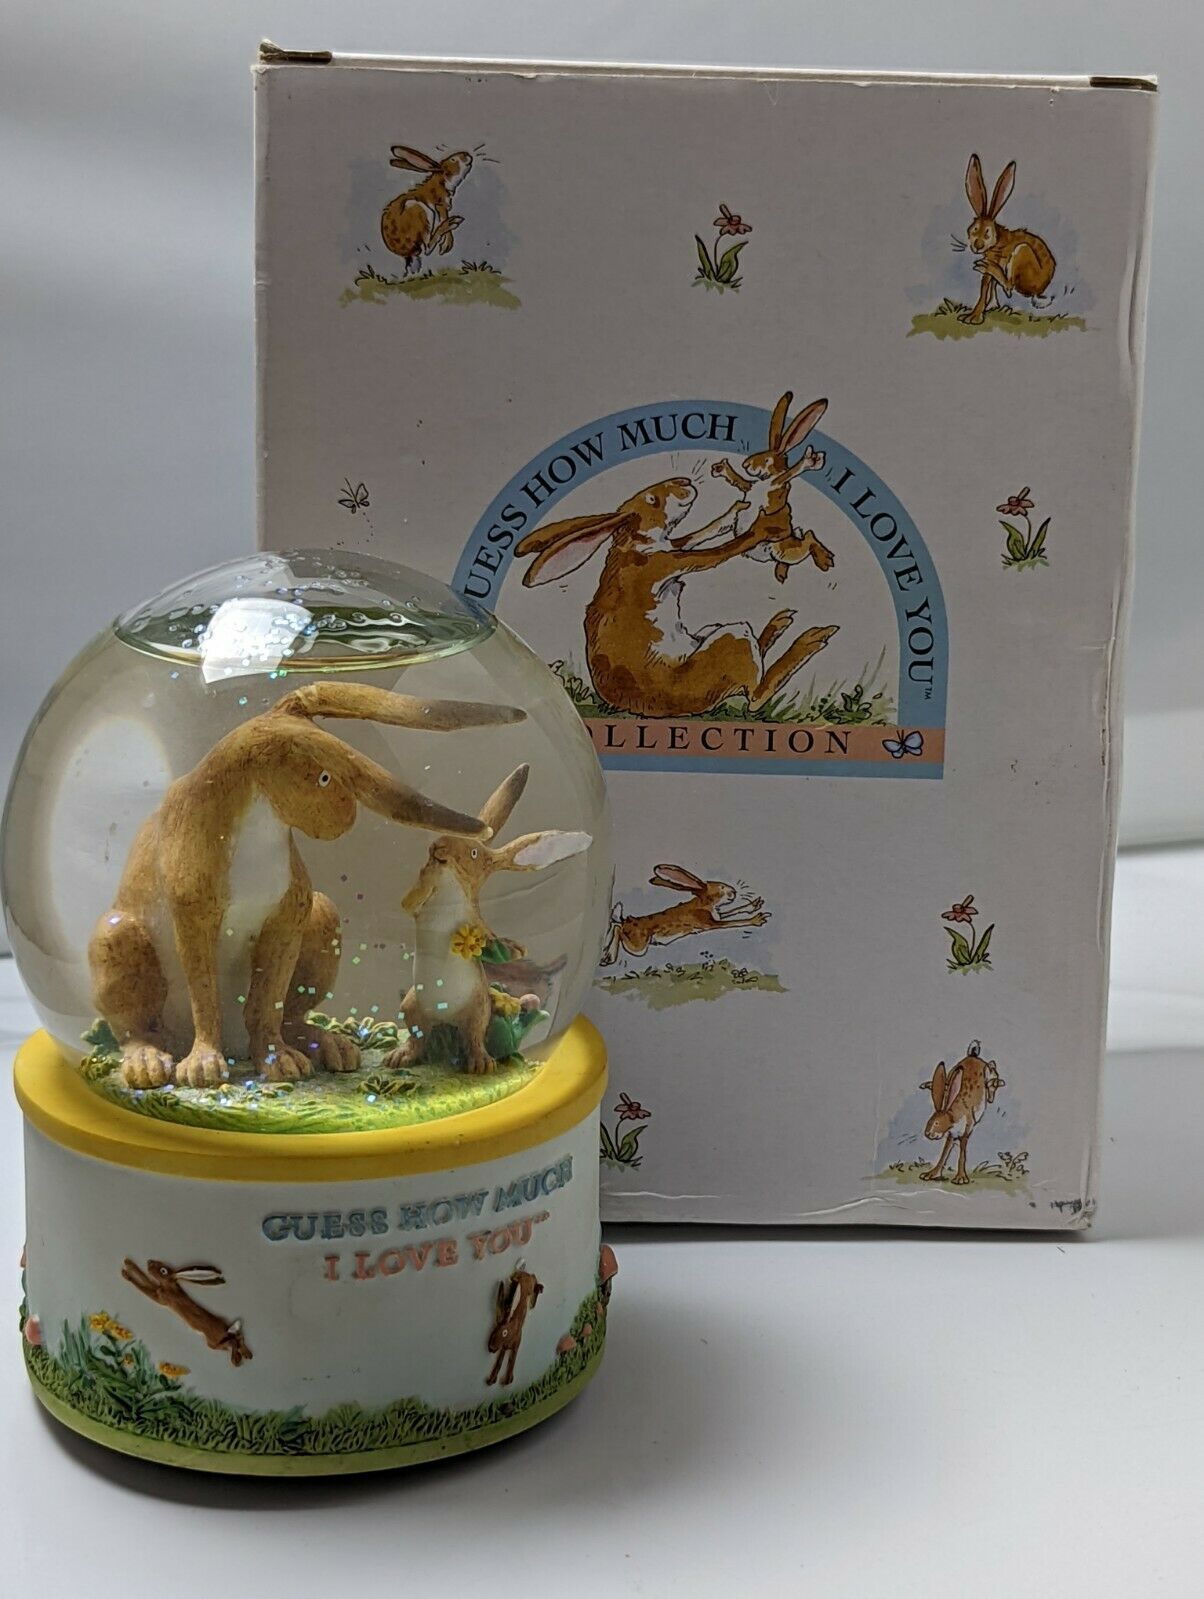 Primary image for San Francisco Music Box Company Guess How Much I Love You Snow Globe